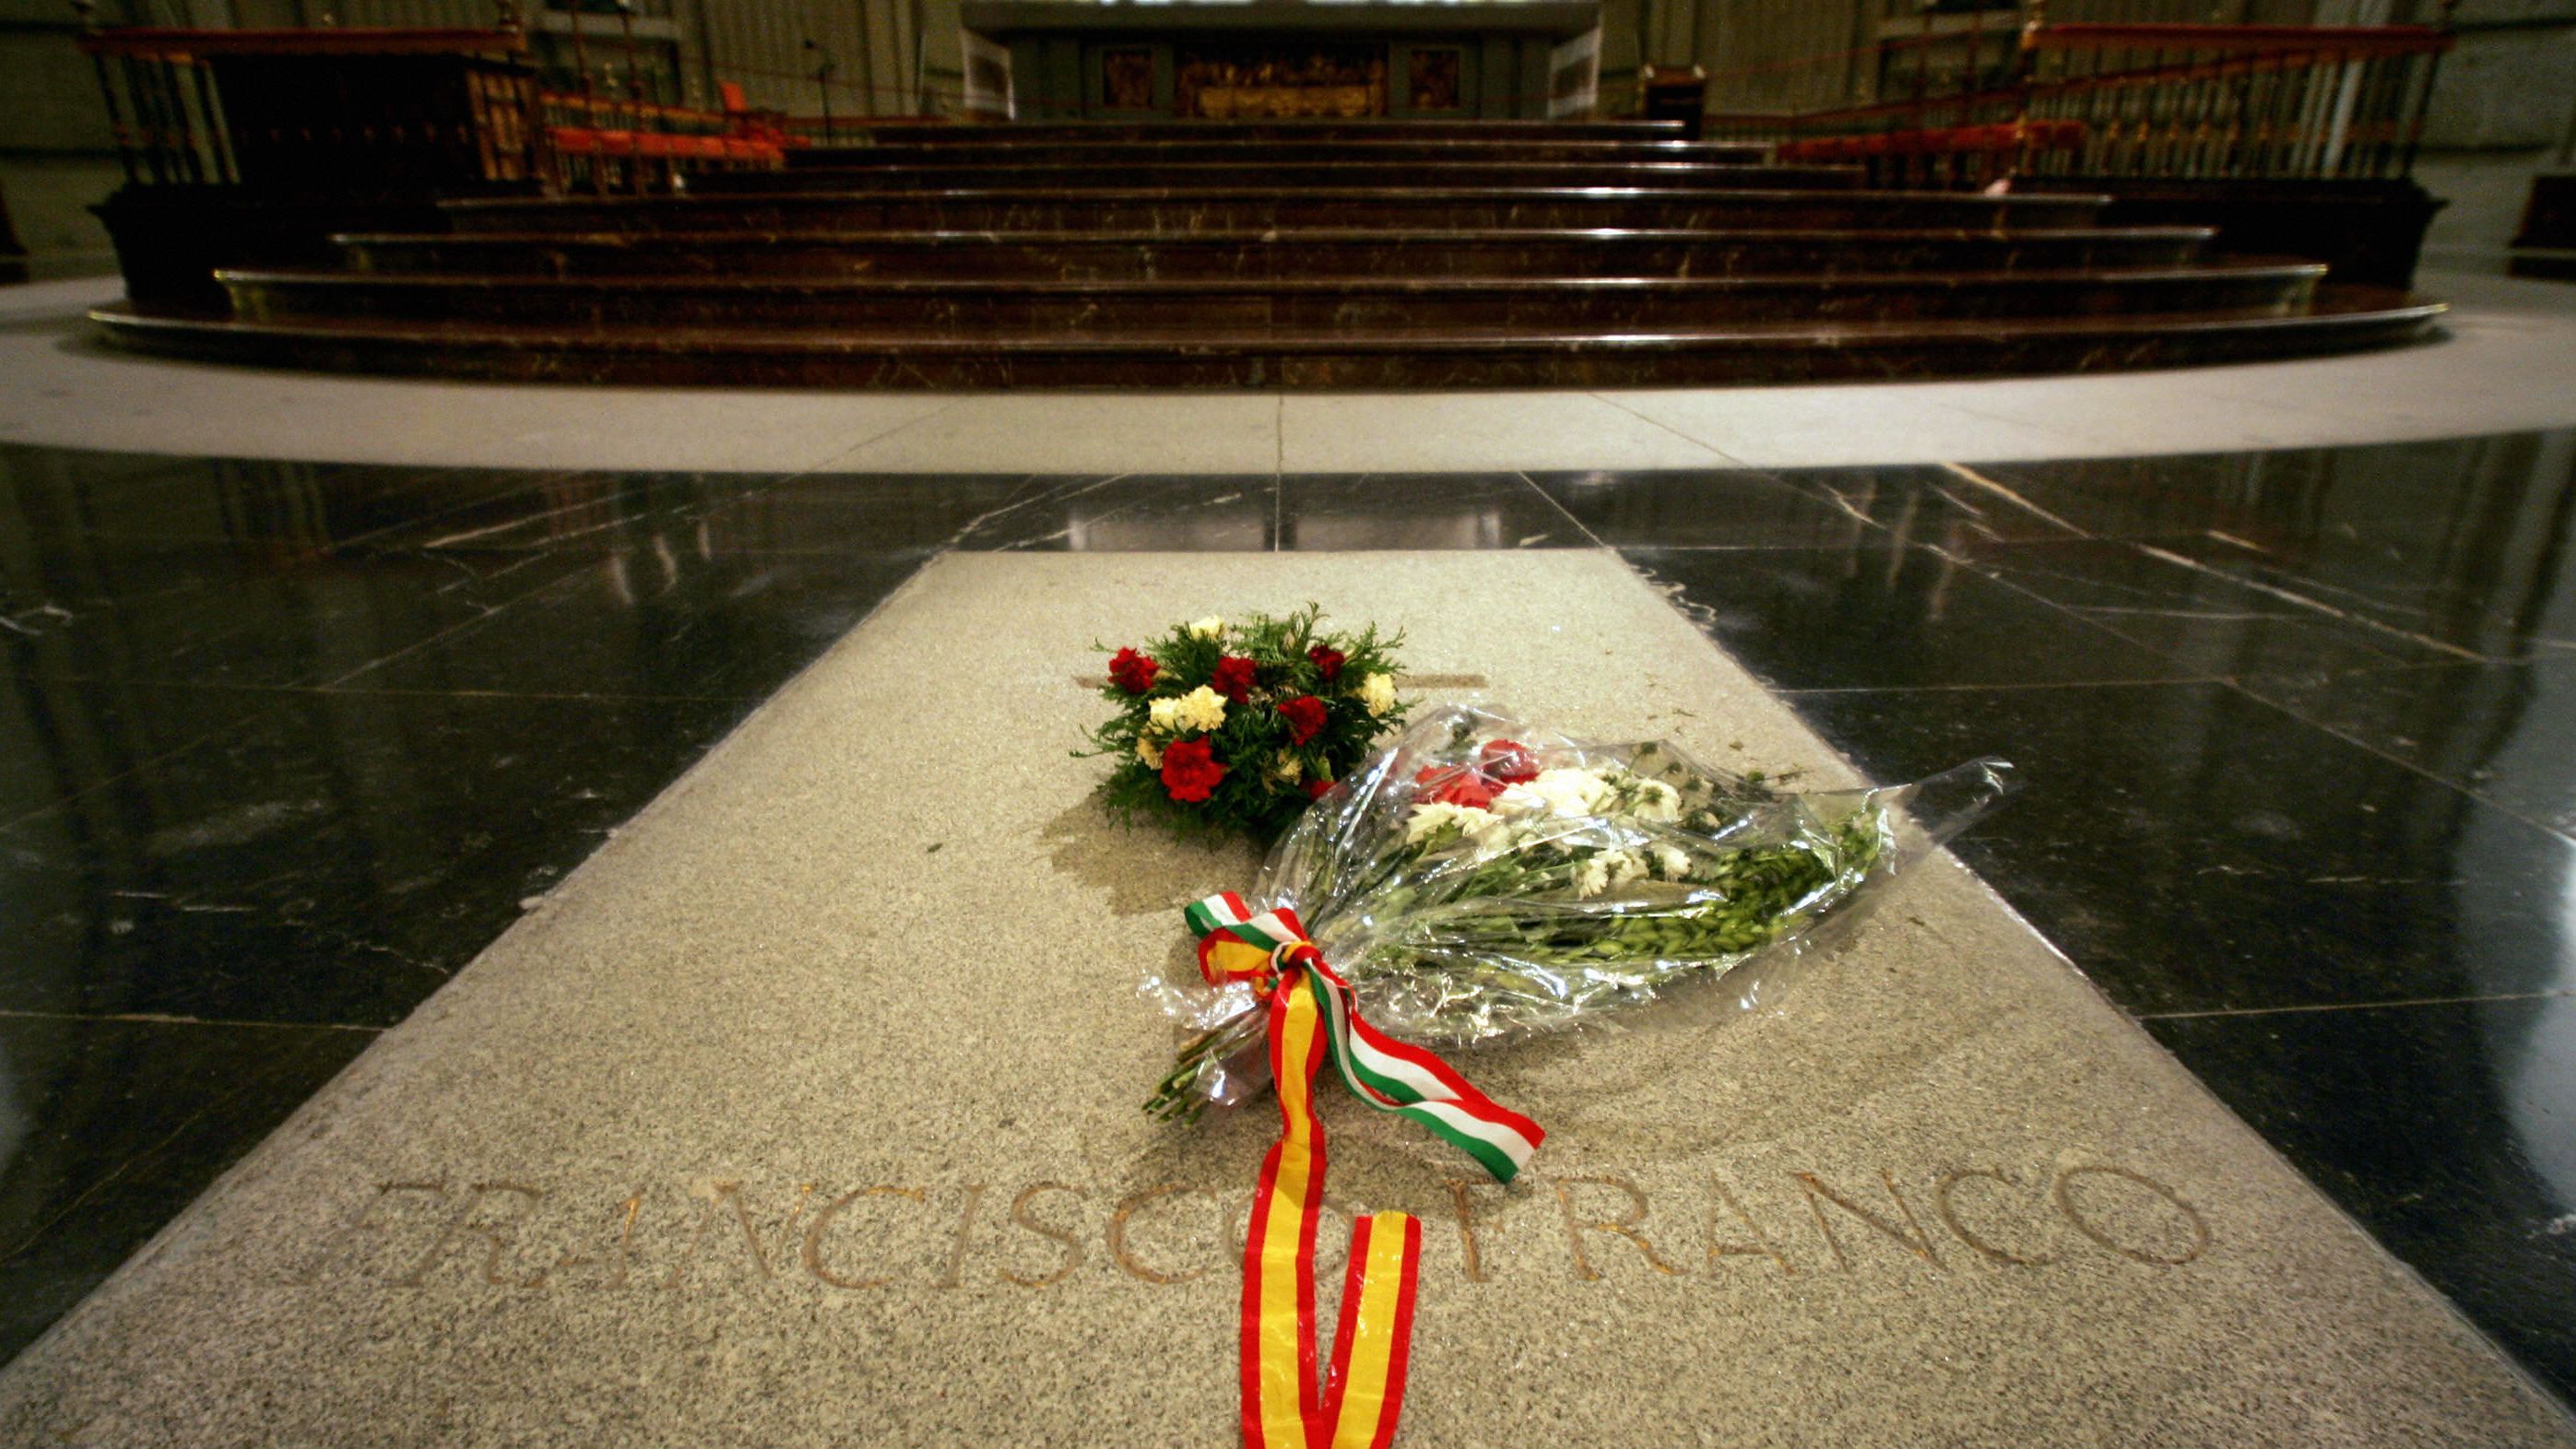 The tomb of Francisco Franco in The Valley of the Fallen, where he was buried after his death in 1975.